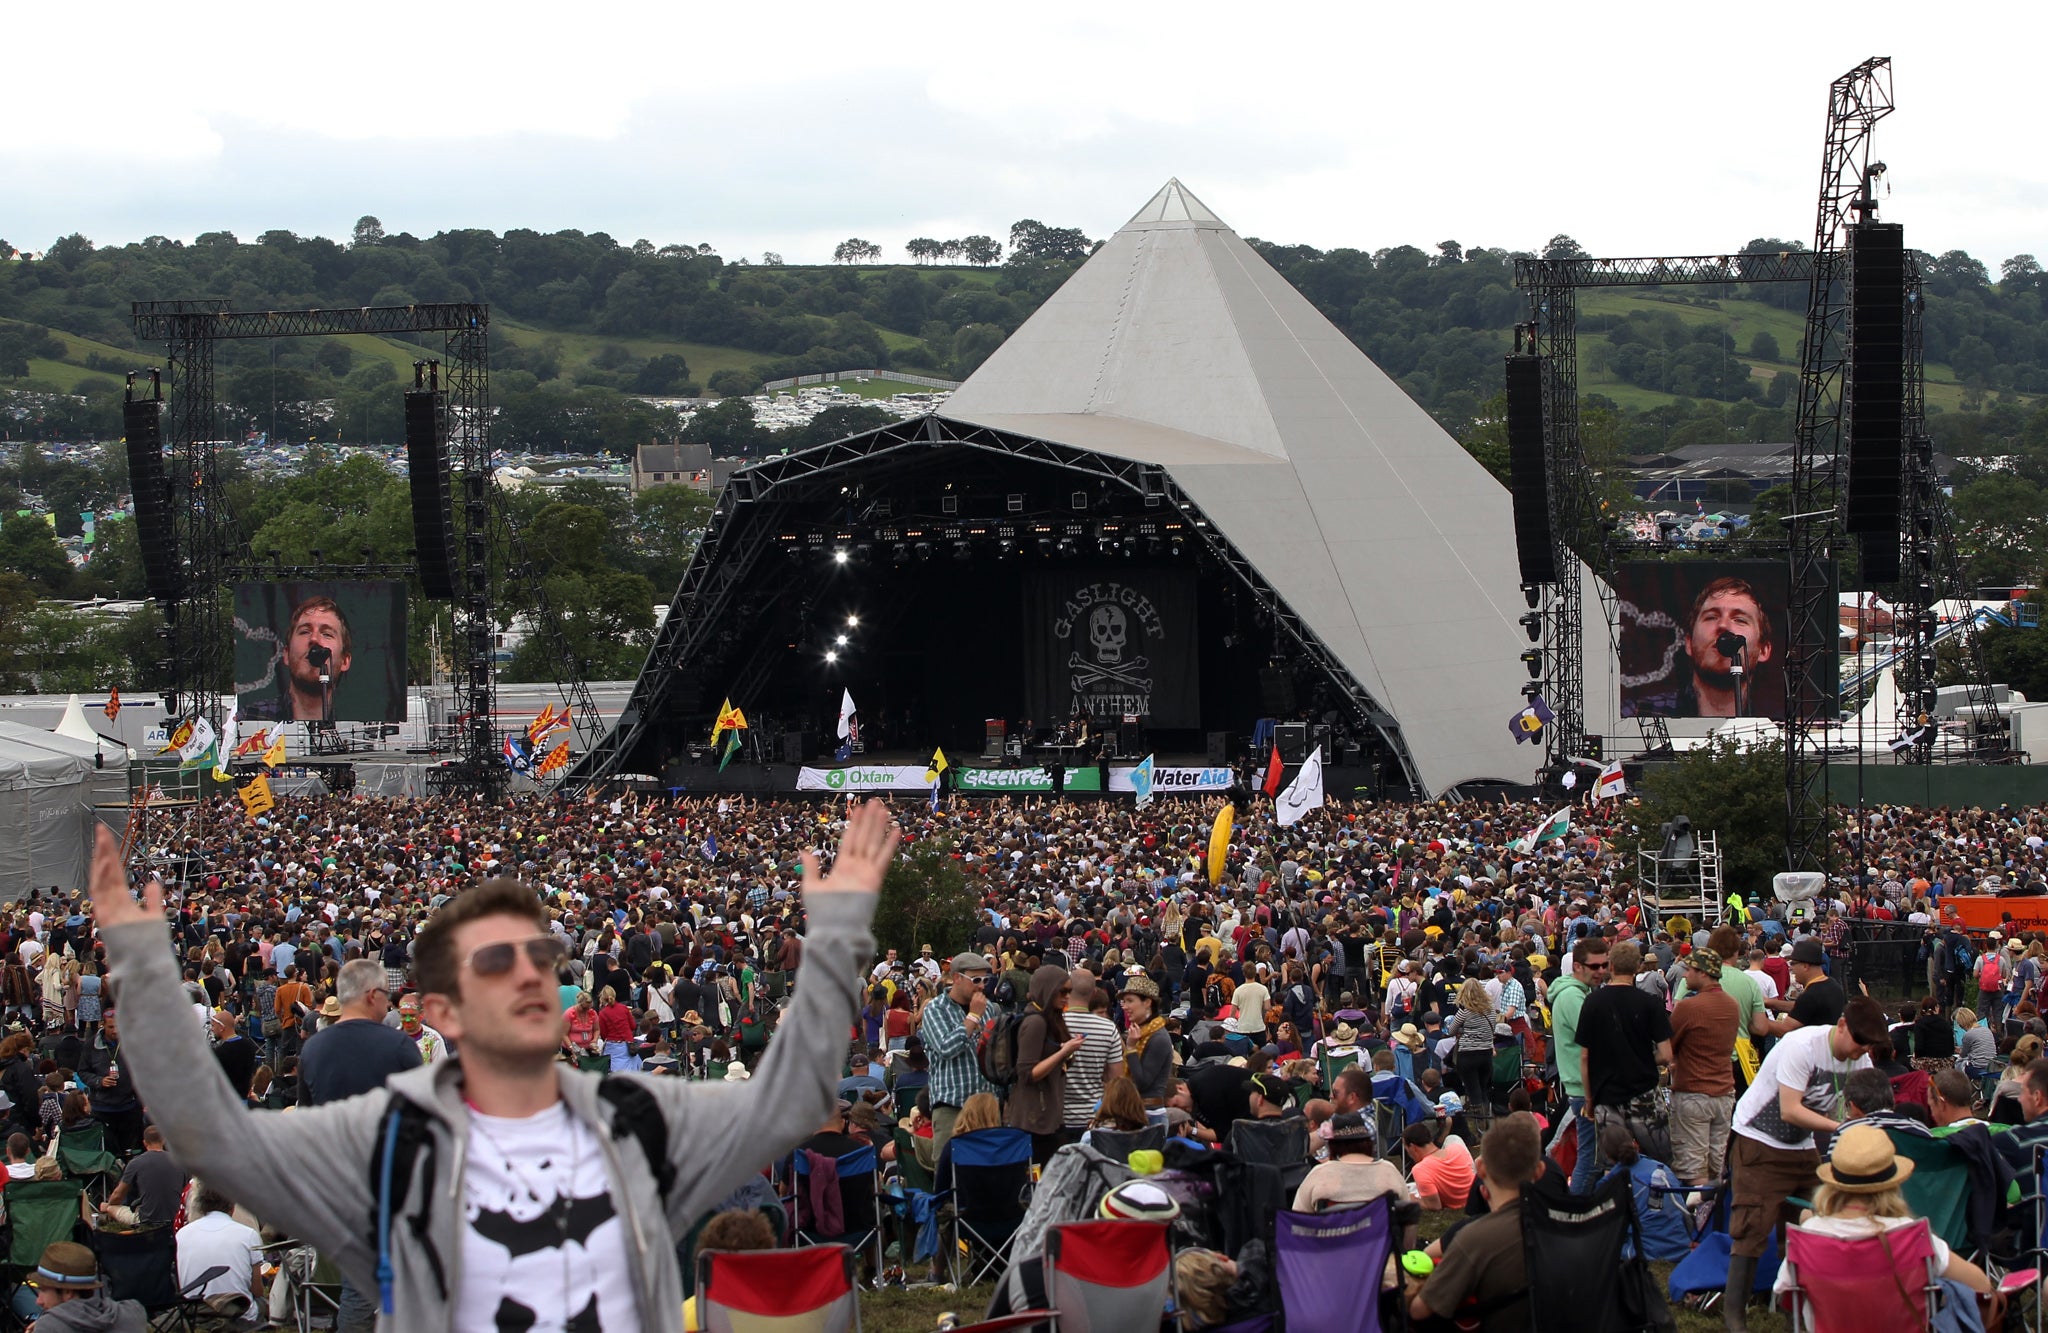 Bookings for Pyramid Stage next year have already been made